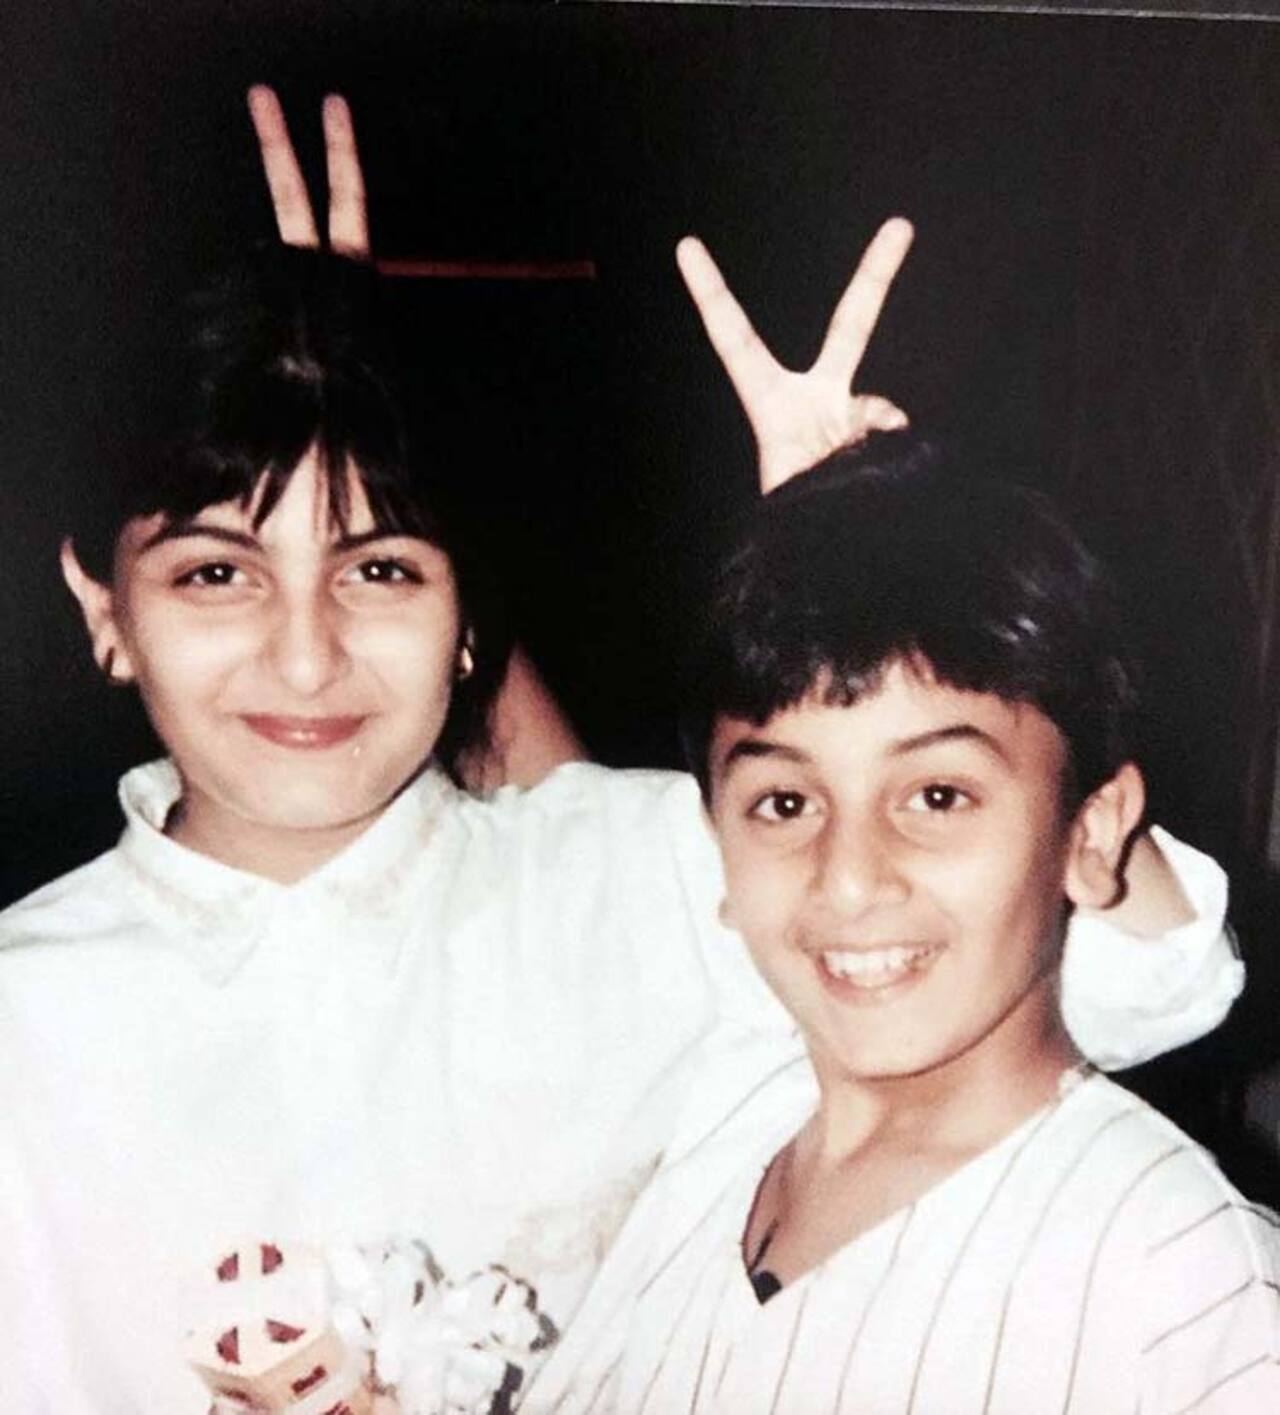 Seems like Ranbir Kapoor had a penchant for making V symbols since always! Here, his victim is his sister Riddhima Kapoor, who teased back with equal vigour. Don't know what we're talking about? See this cute throwback photo which has Ranbir posing mischievously in another Kapoor reunion. 